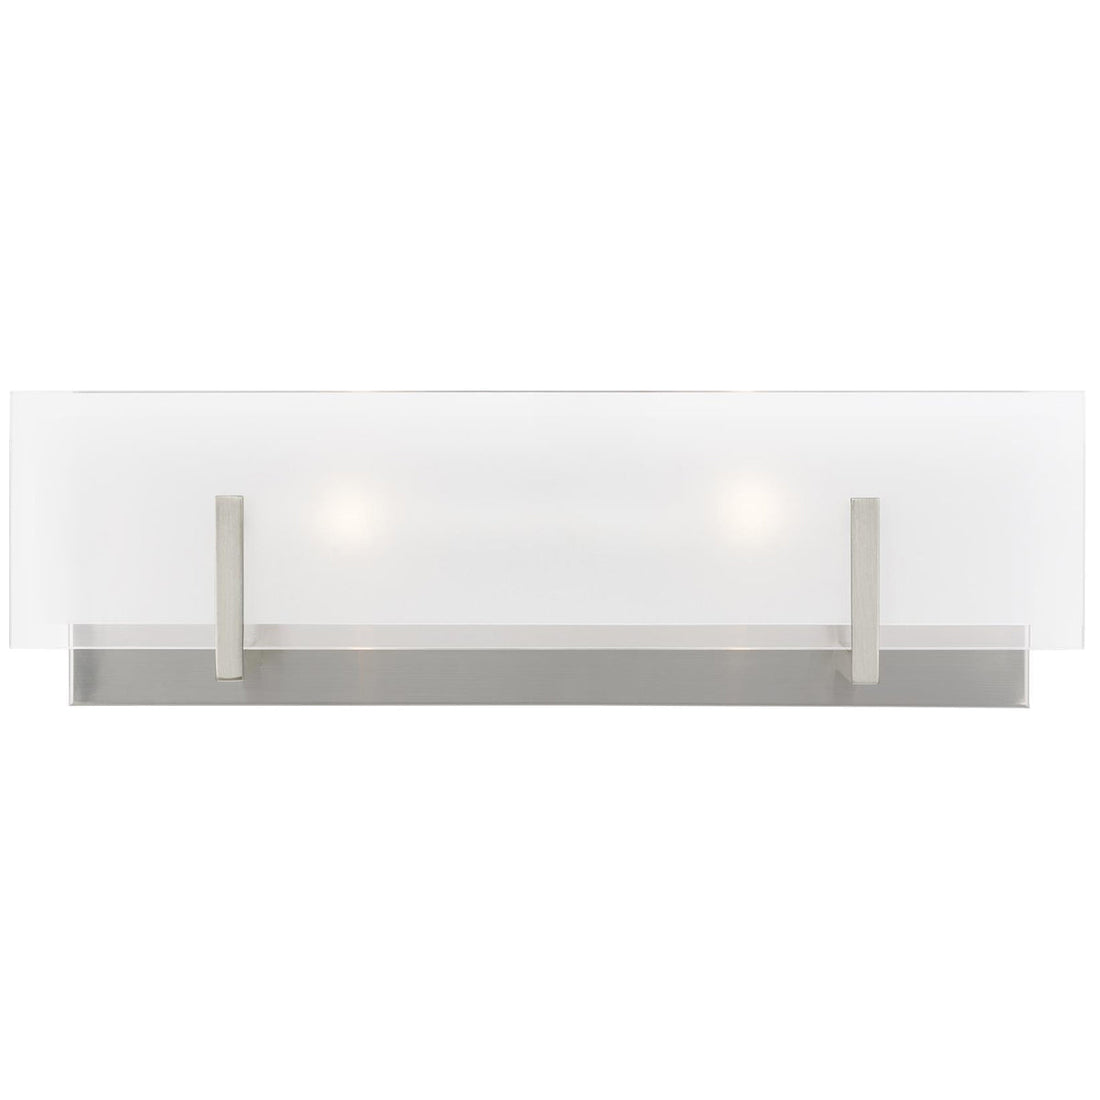 Sea Gull Lighting Syll 2-Light Wall/Bath Sconce without Bulb